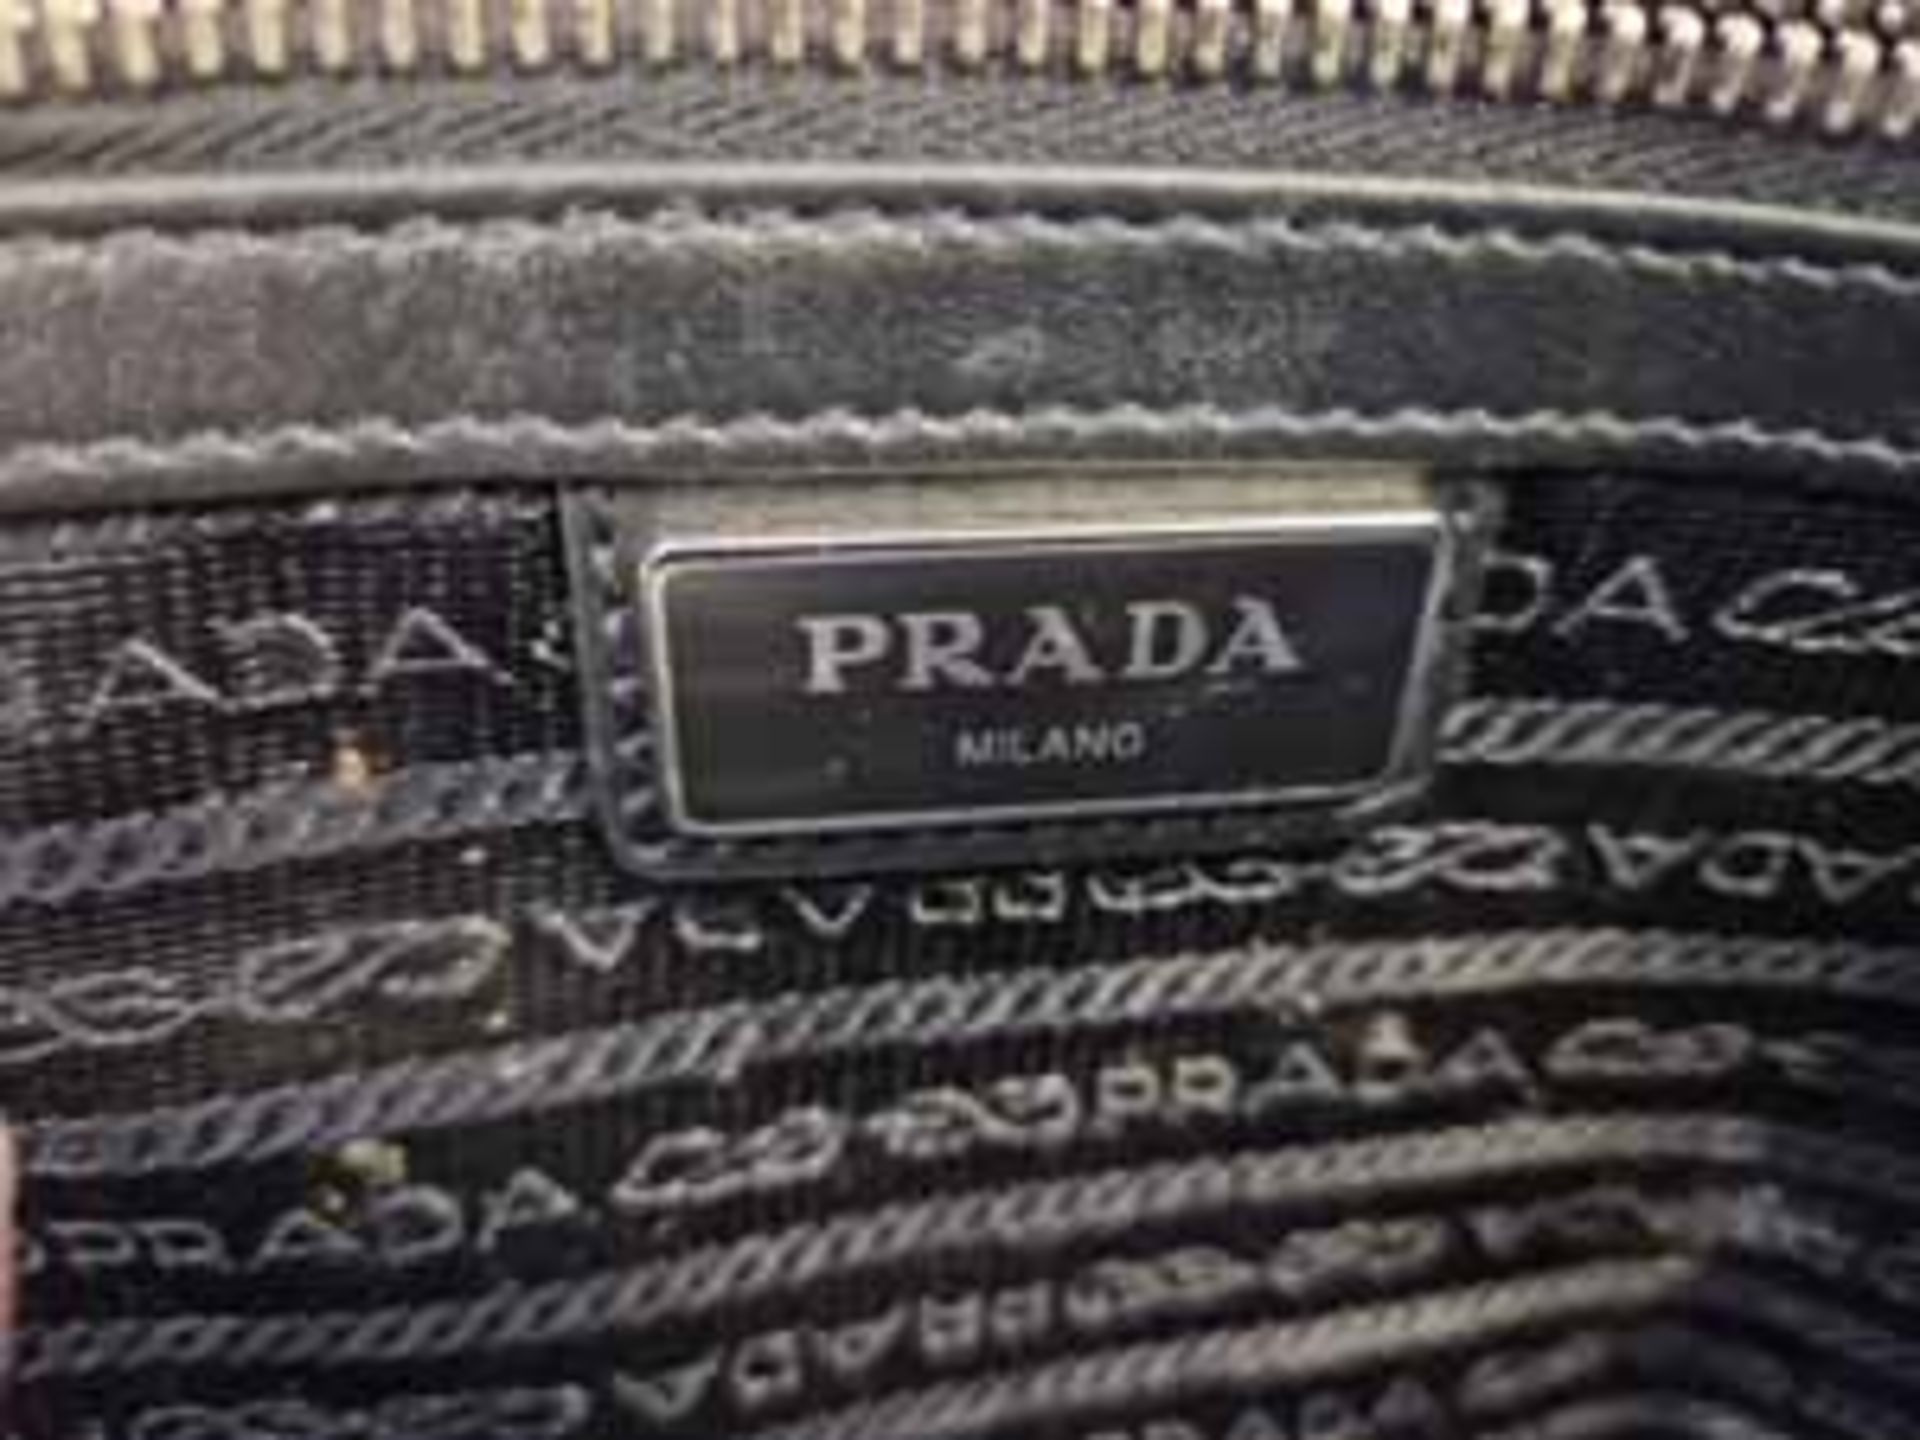 A PRADA Black Saffiano Leather Pouch/Clutch Bag with Textile Lining and Internal Pocket and Zip - Image 6 of 6